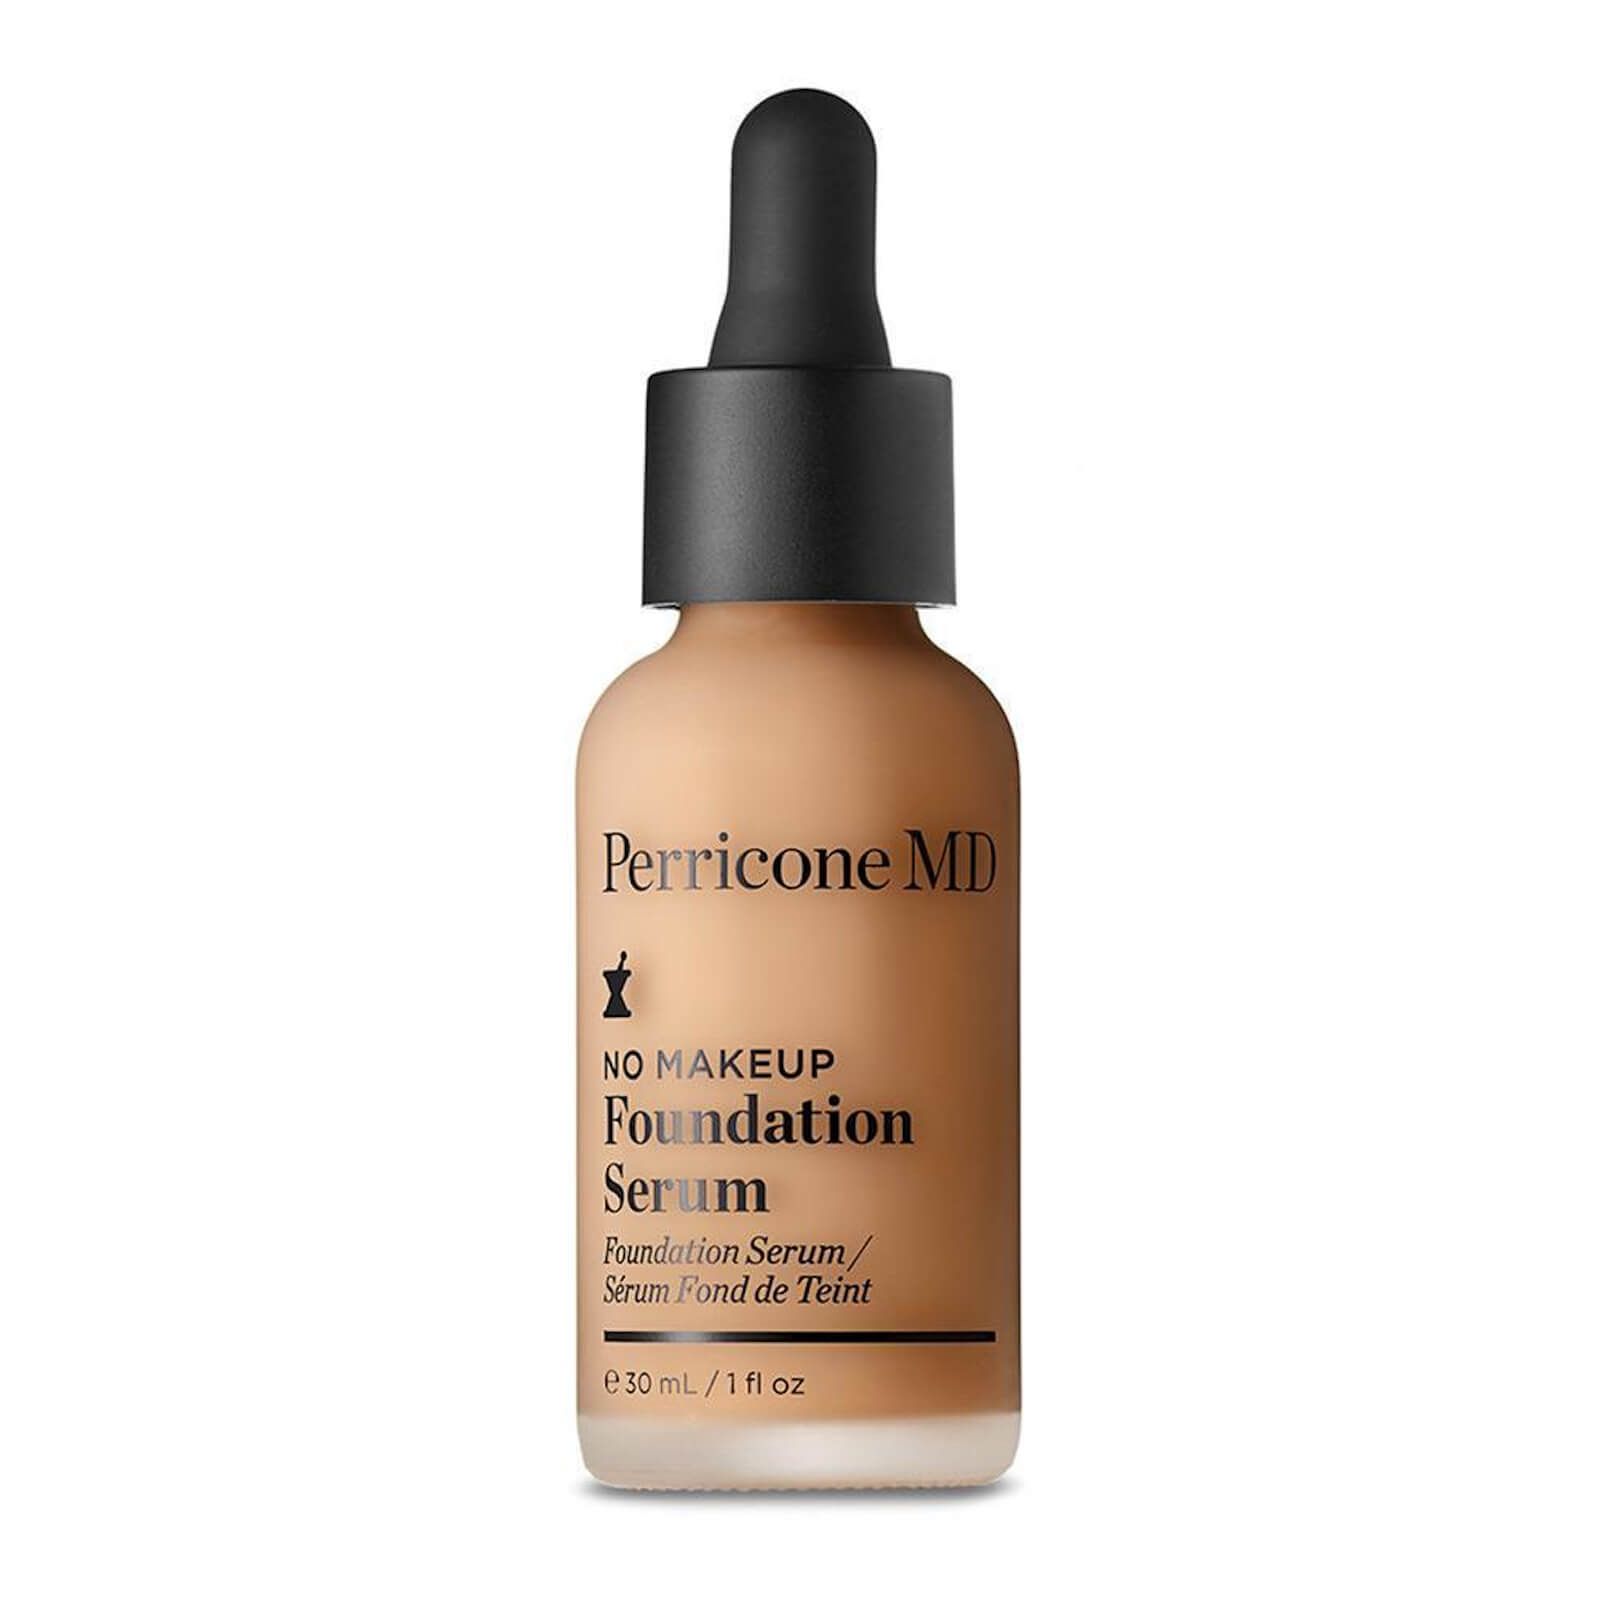 Perricone MD No Makeup Foundation Serum SPF 20 30ml (Various Shades) - 3 Nude